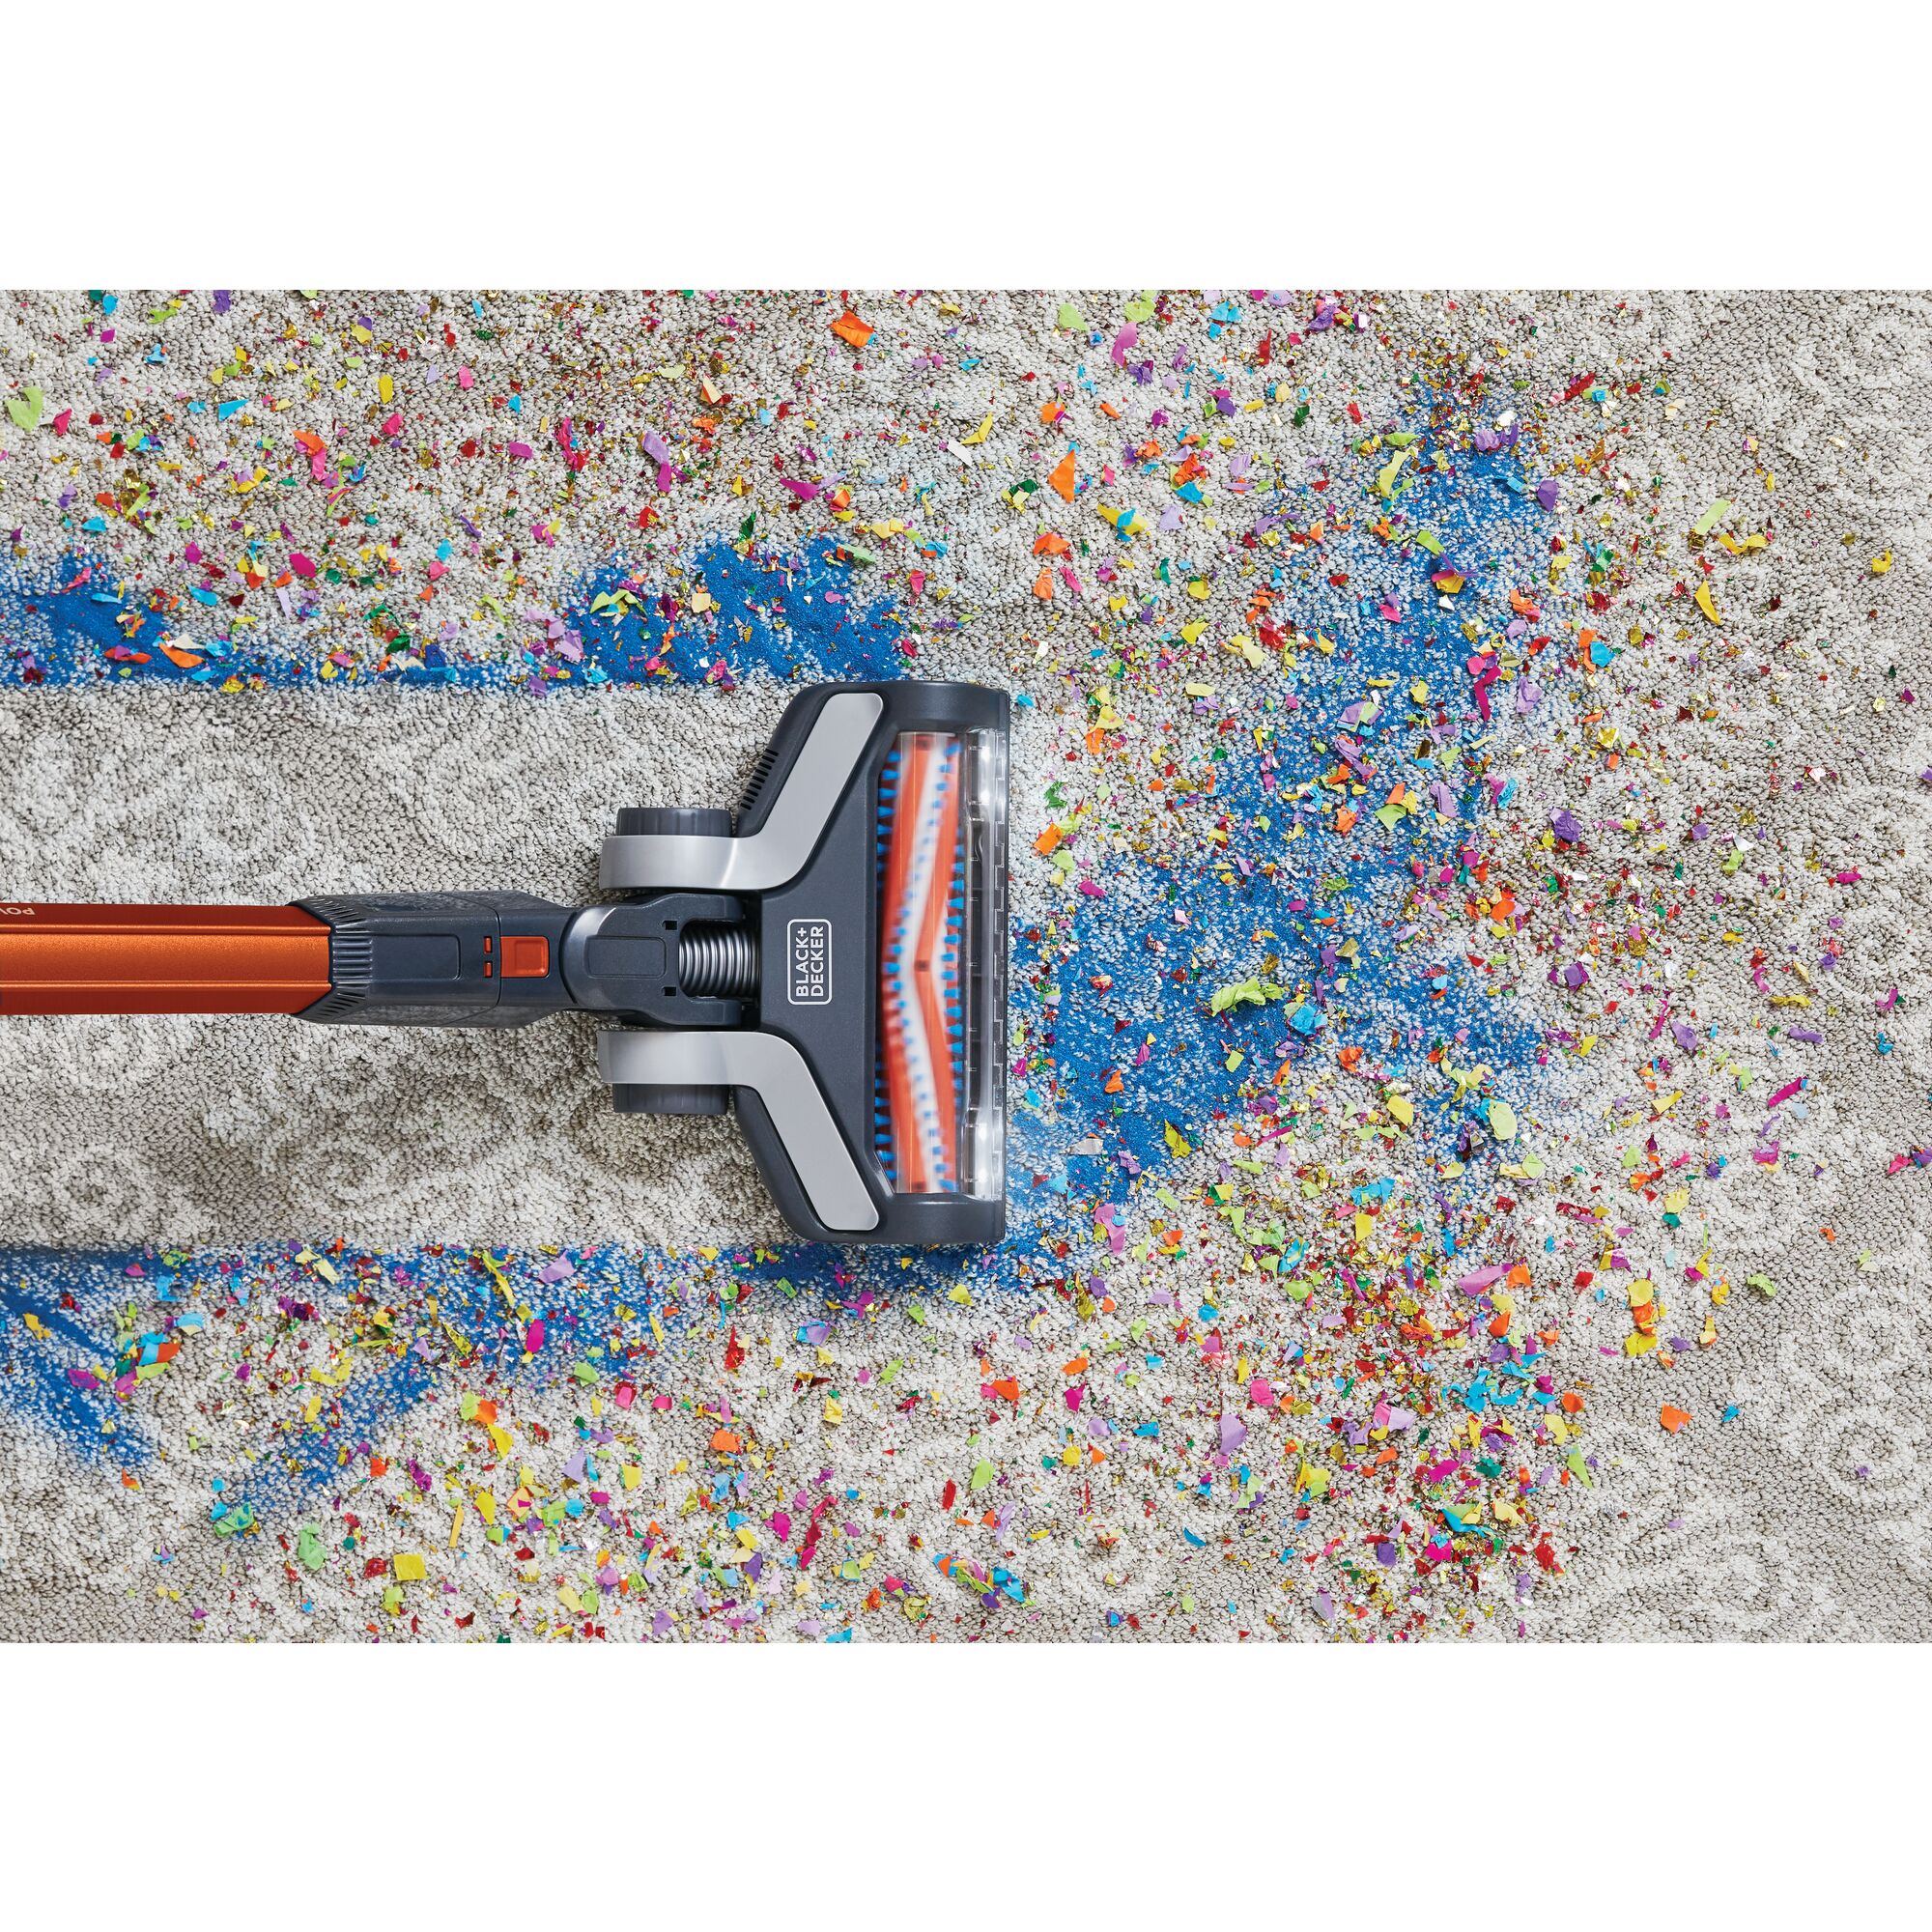 POWER SERIES Extreme Cordless Stick Vacuum Cleaner being used to clean confetti and party favours from carpet.